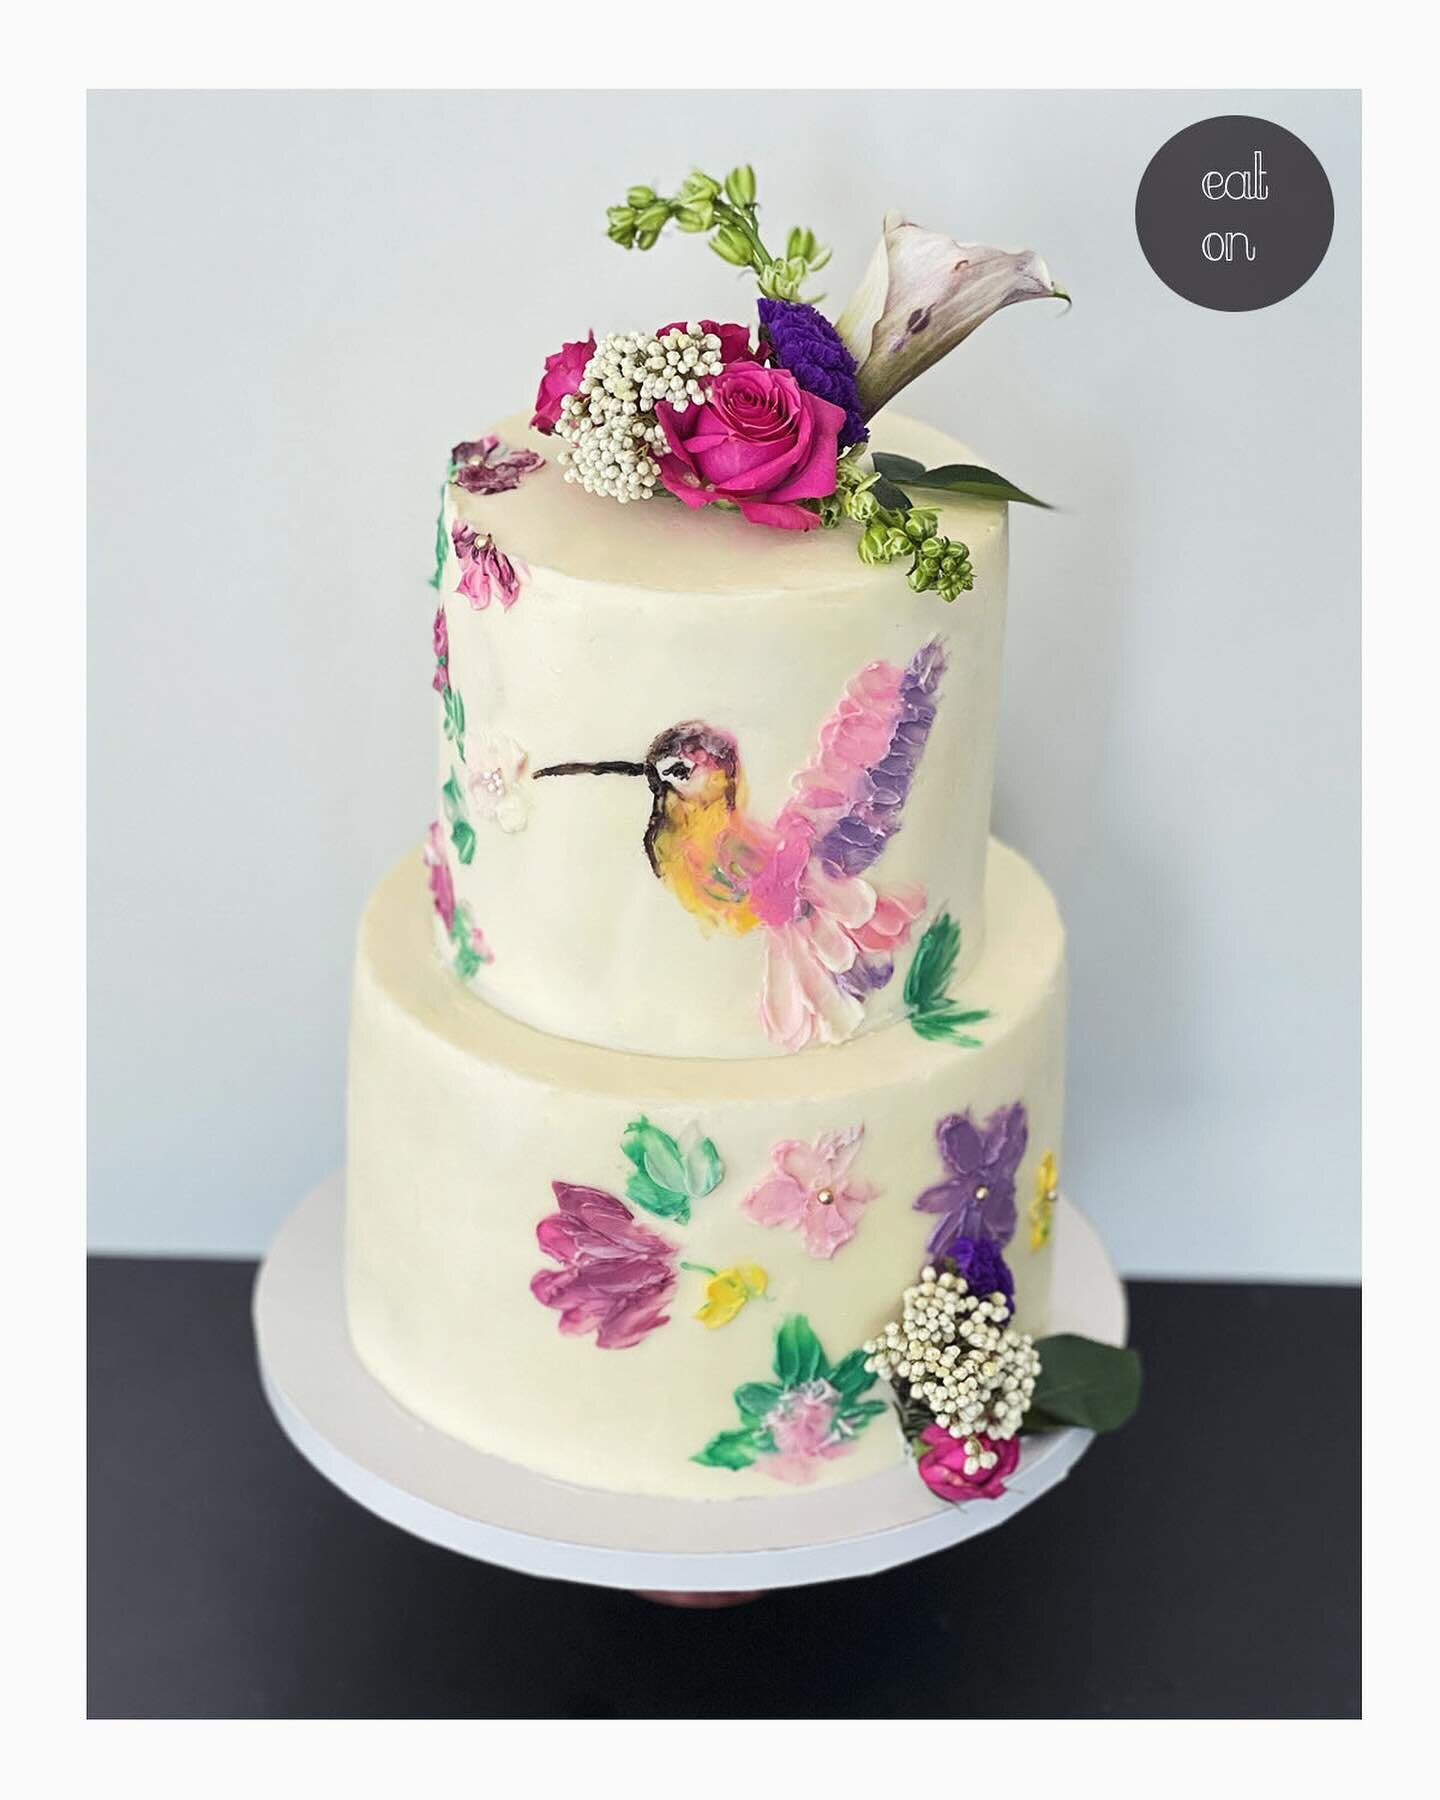 My latest cake creation featuring a delicate hummingbird and vibrant flowers, hand-painted with buttercream! 🍰🌸

#customcakes #customorder #hummingbird #birthday #birthdaycake #customcake #birthdaycakes #cakes #cakeart #peachtreecityfood #peachtree